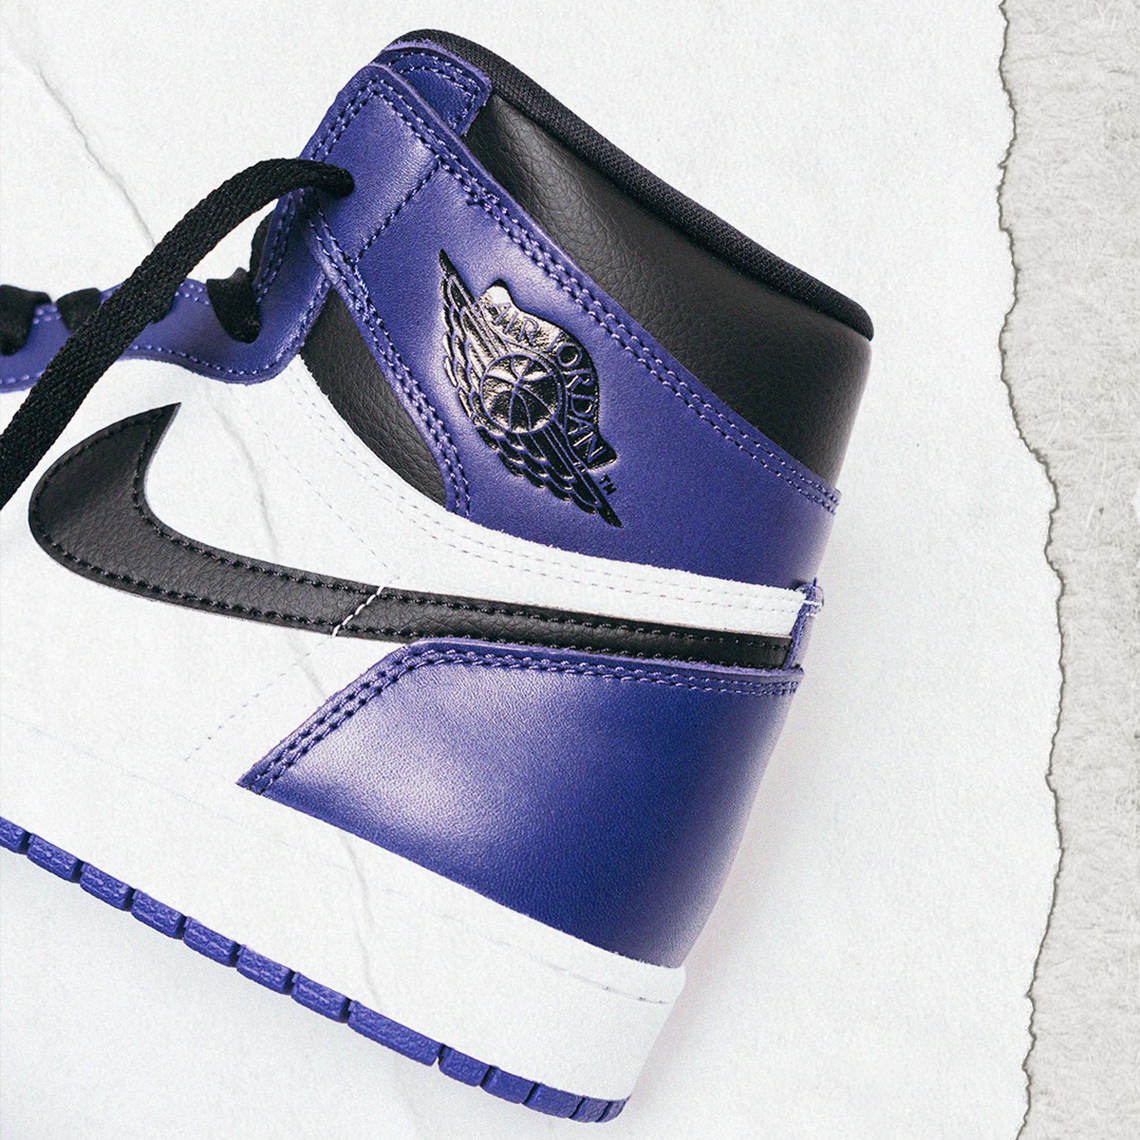 Jordan Brand will be paying homage to the series and the fandom that followed with the